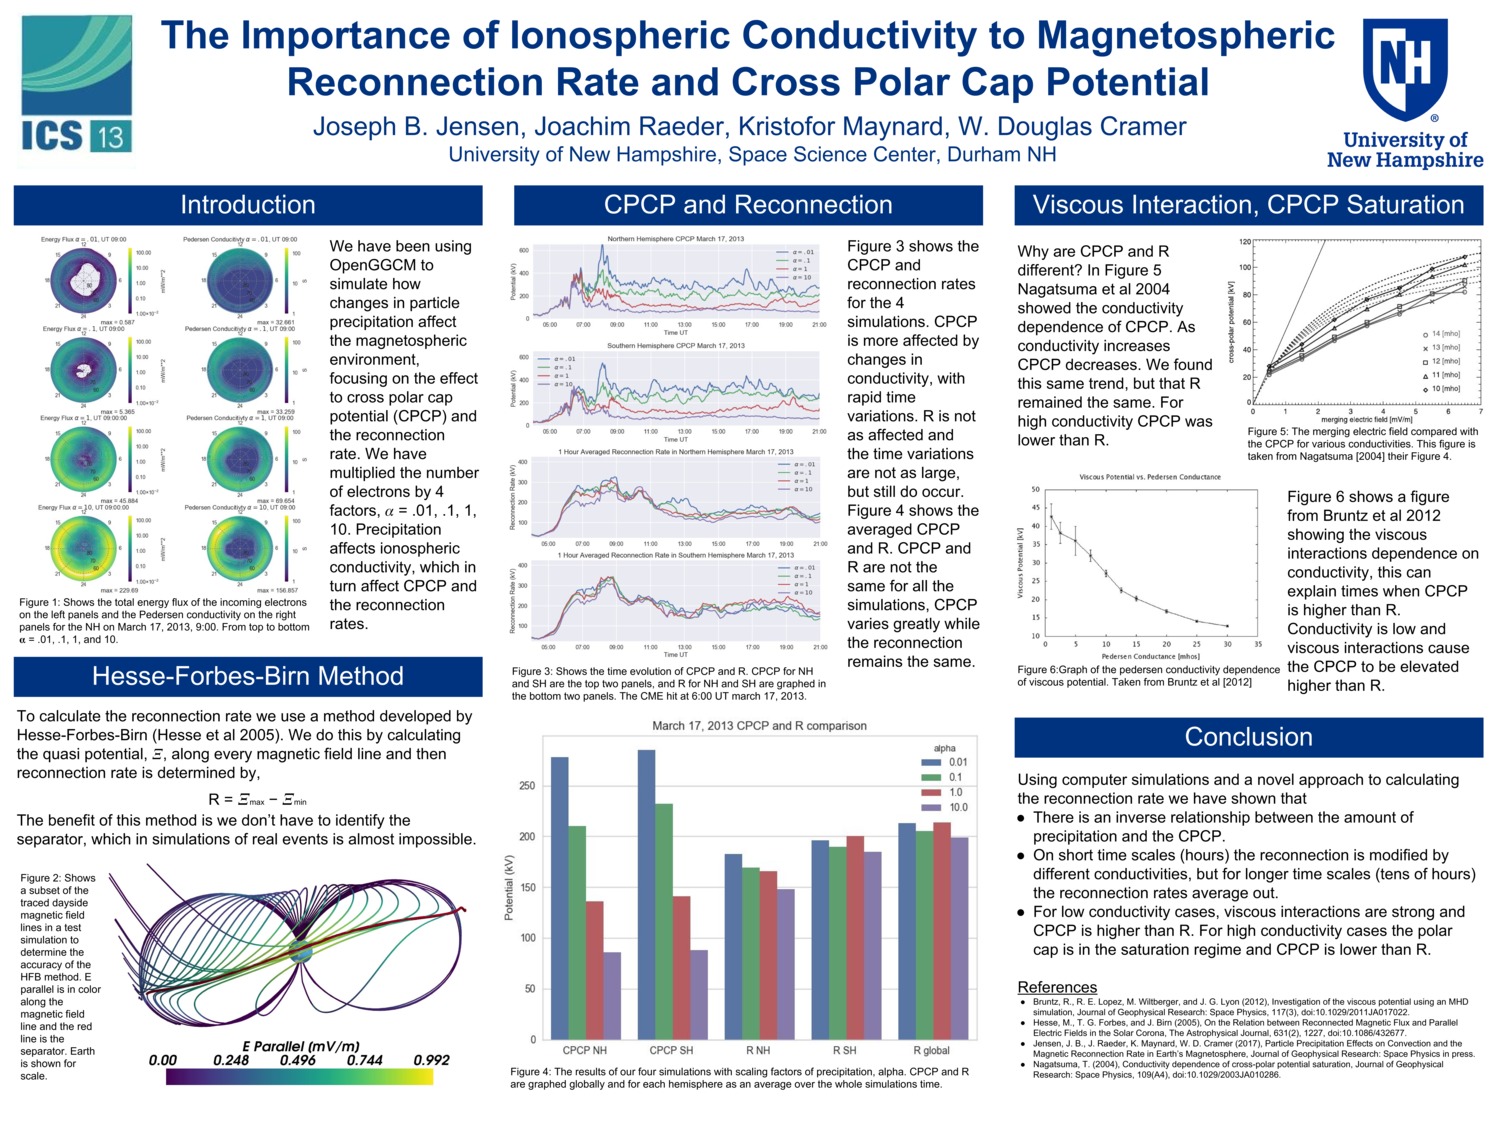 The Importance Of Ionospheric Conductivity To Magnetospheric Reconnection Rate And Cross Polar Cap Potential  by jobejen